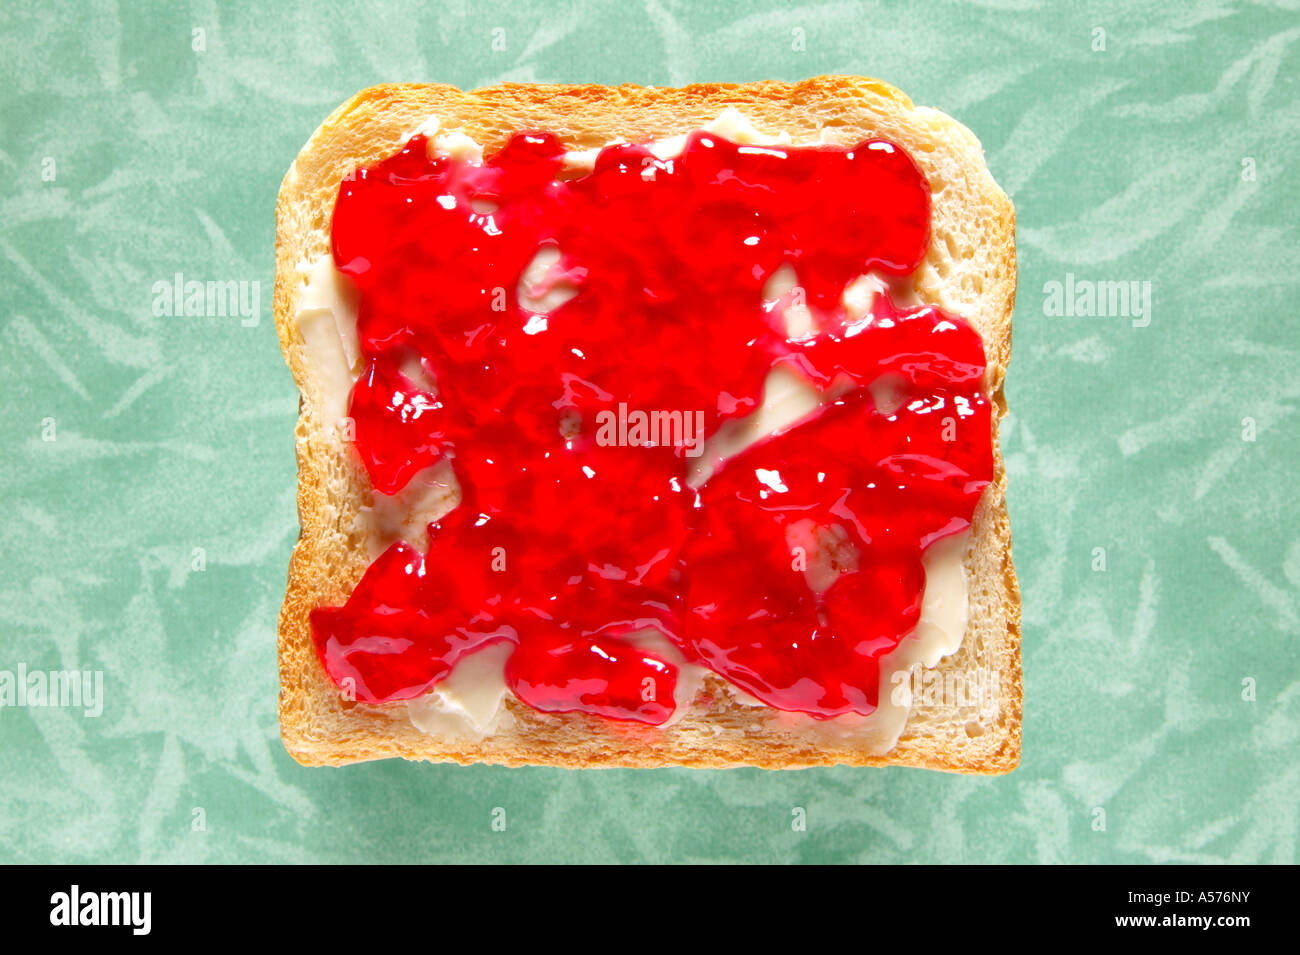 Slice of toast with jelly, close-up, elevated view Stock Photo